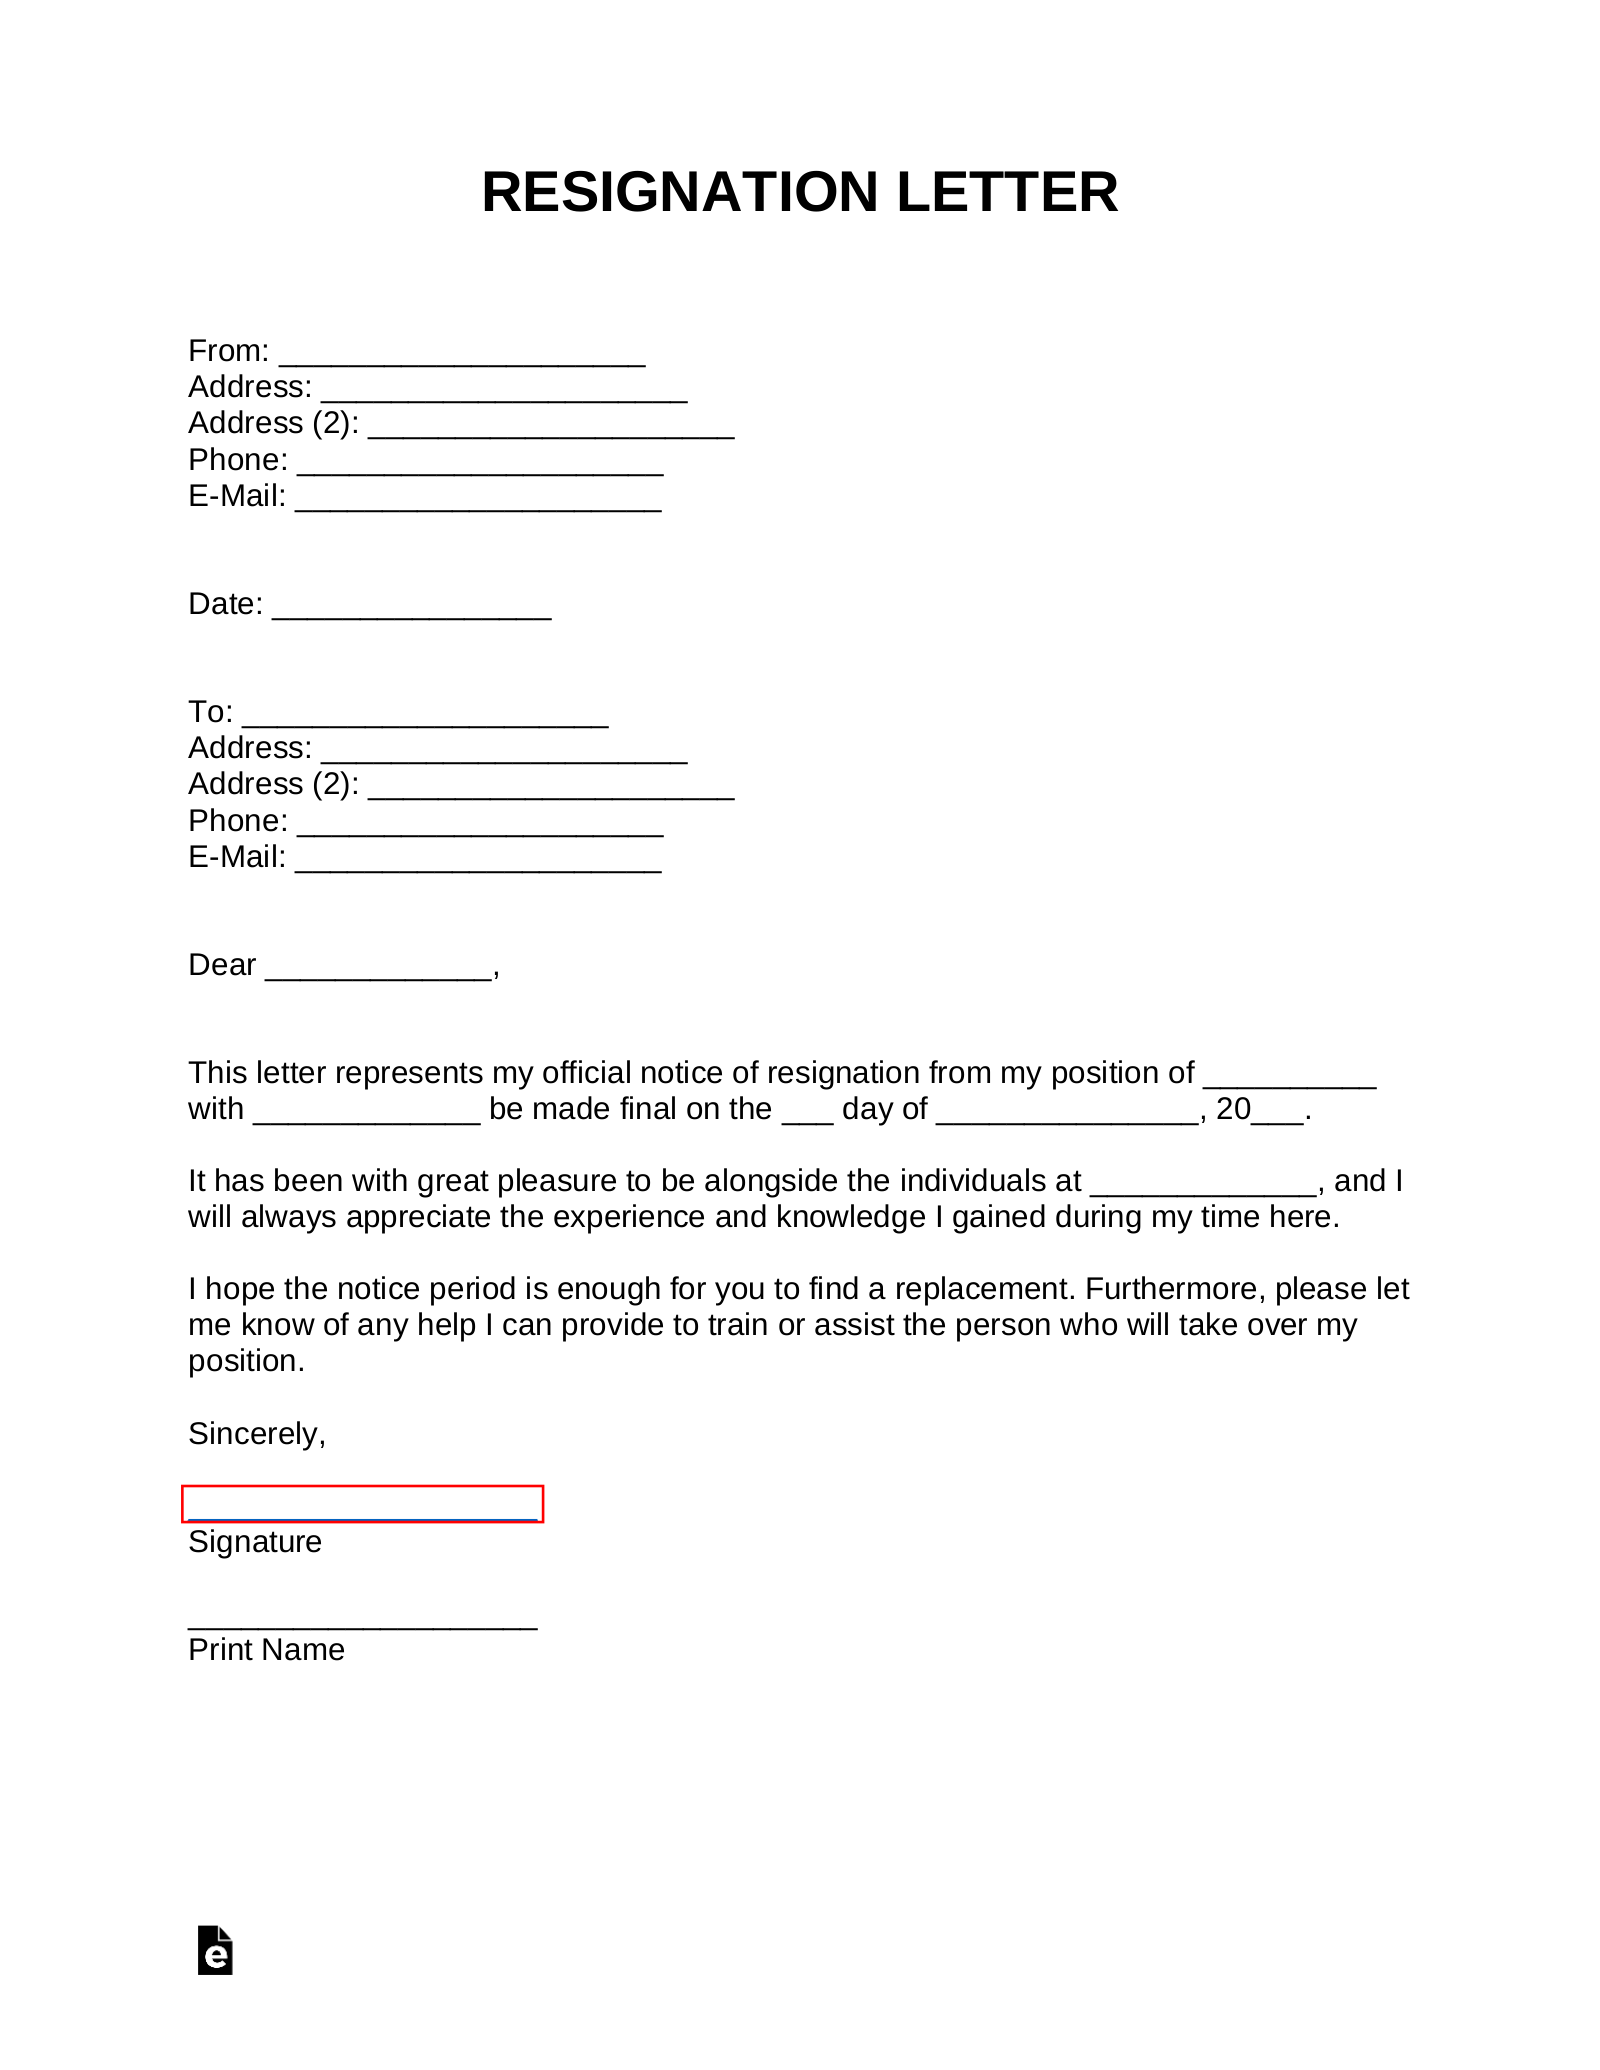 Microsoft Word Letter Format from eforms.com